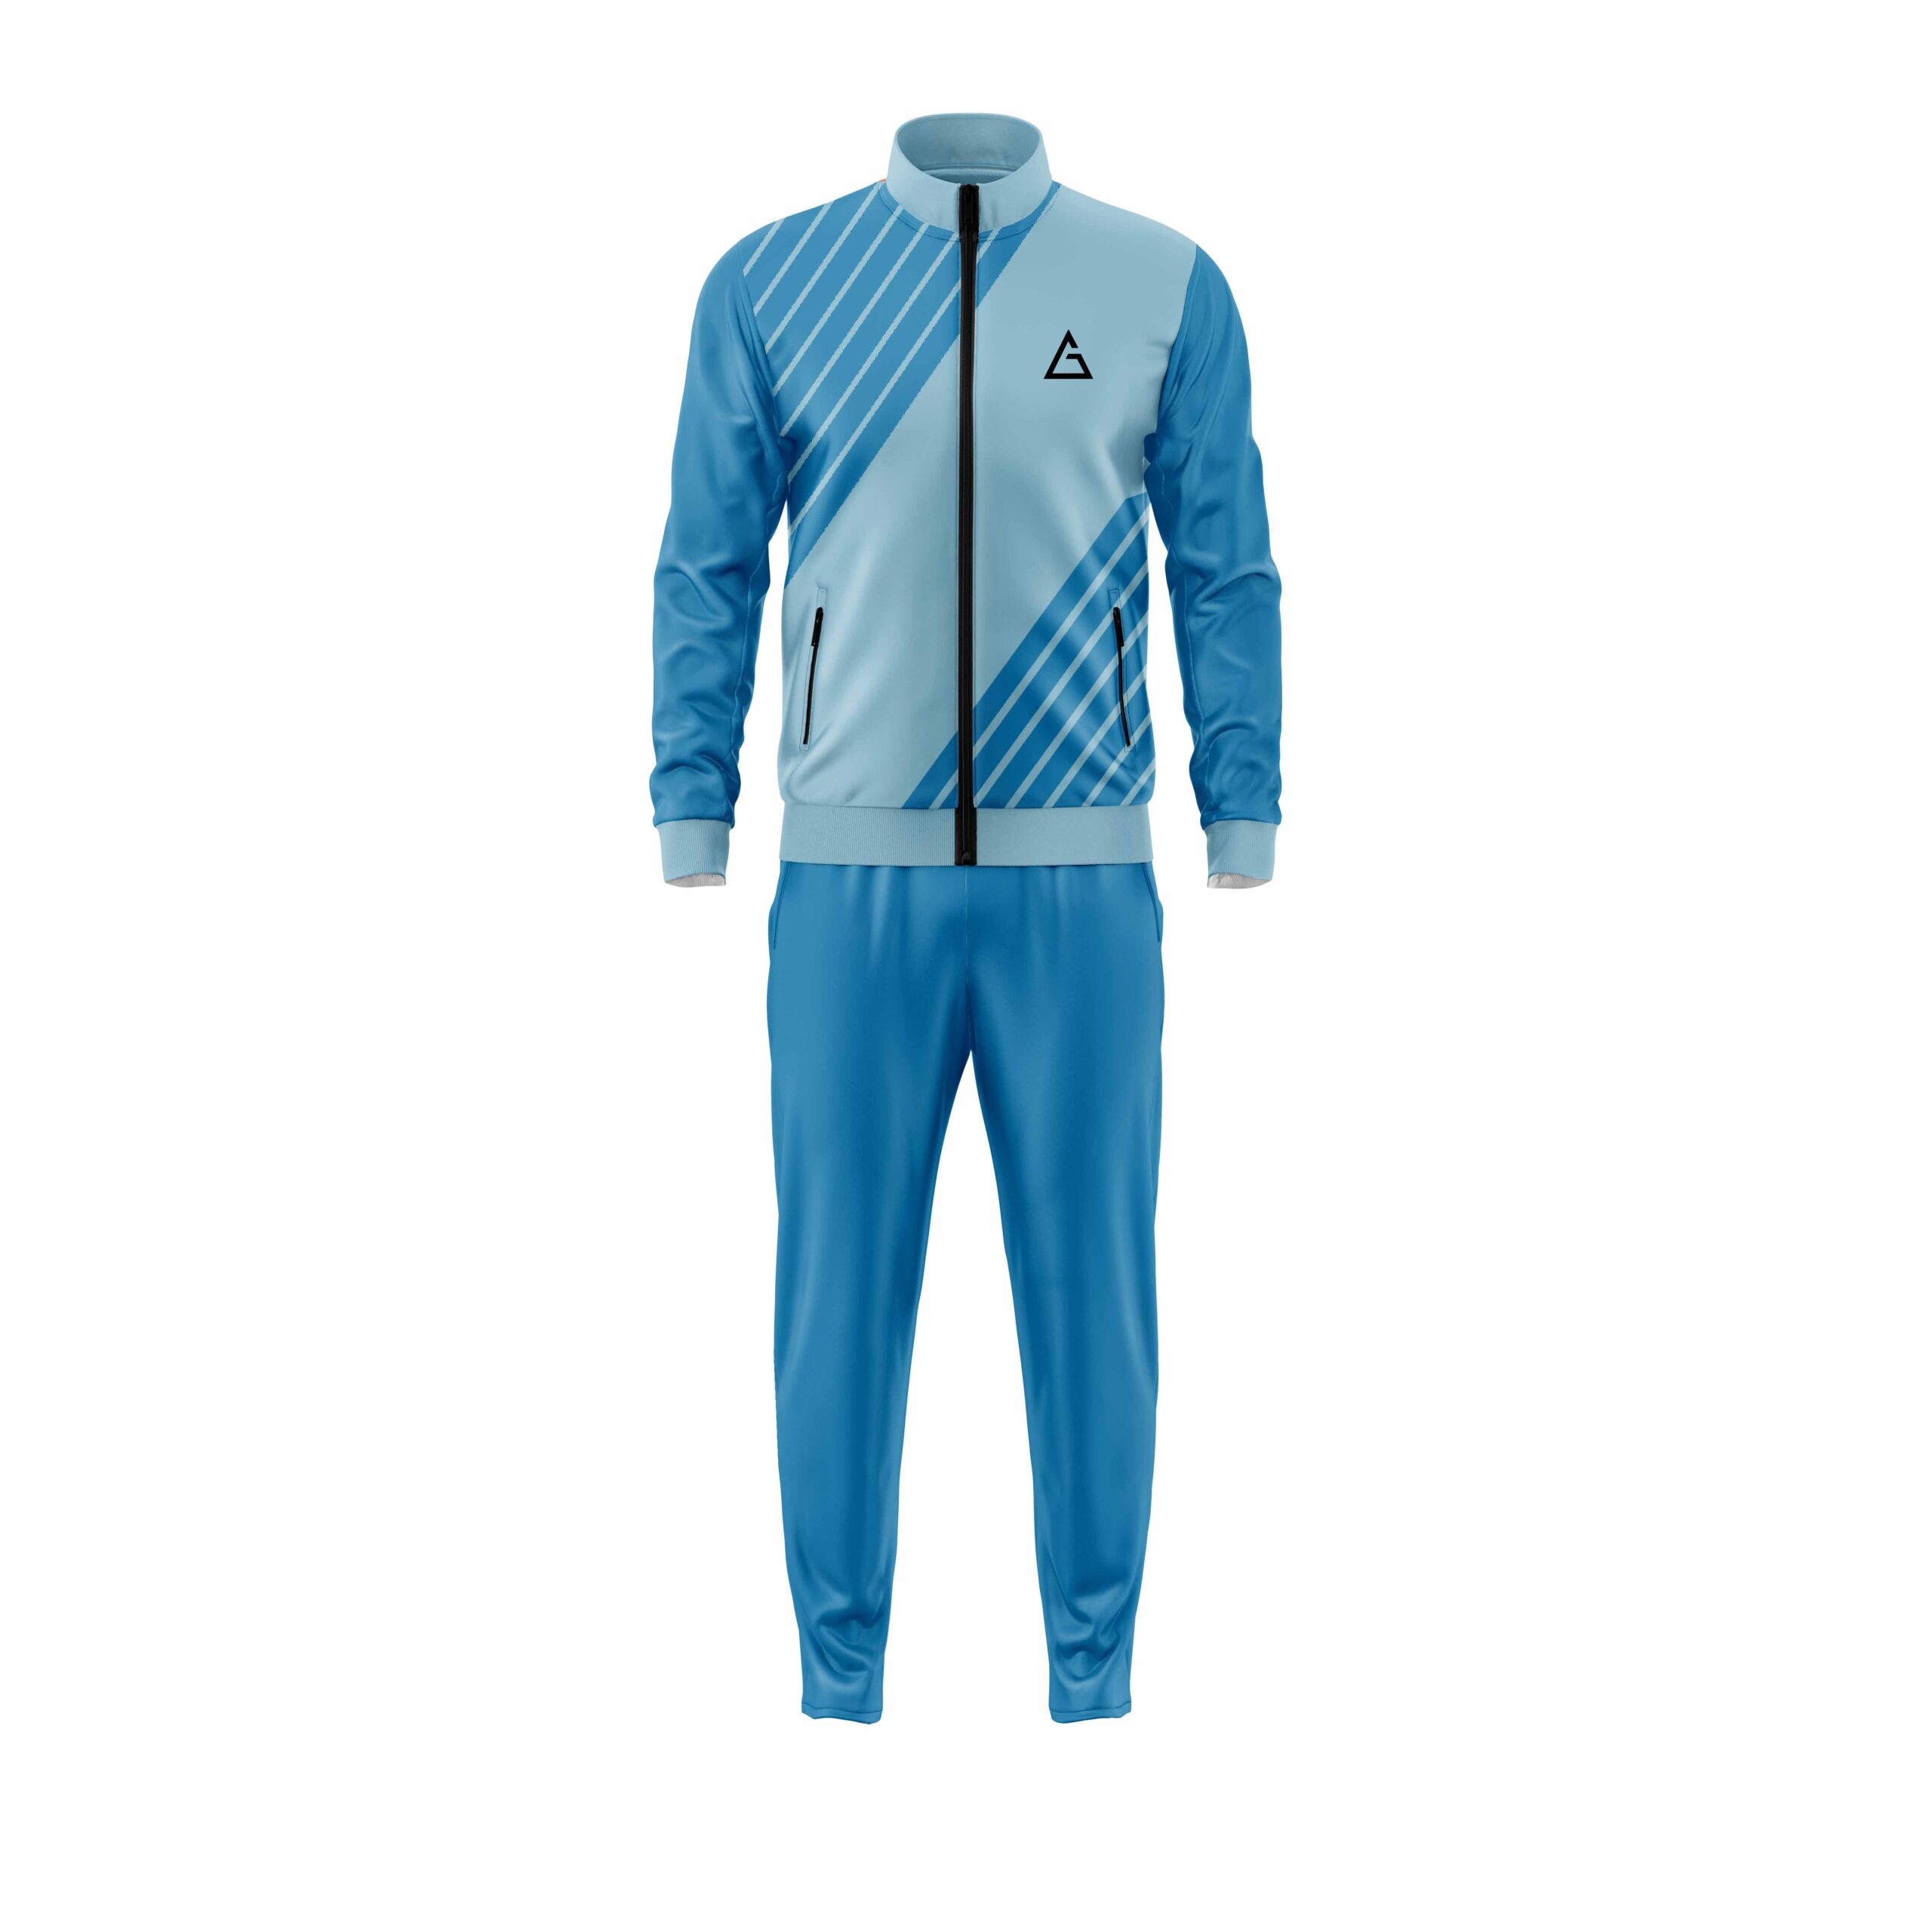 women's tracksuits branded export quality design